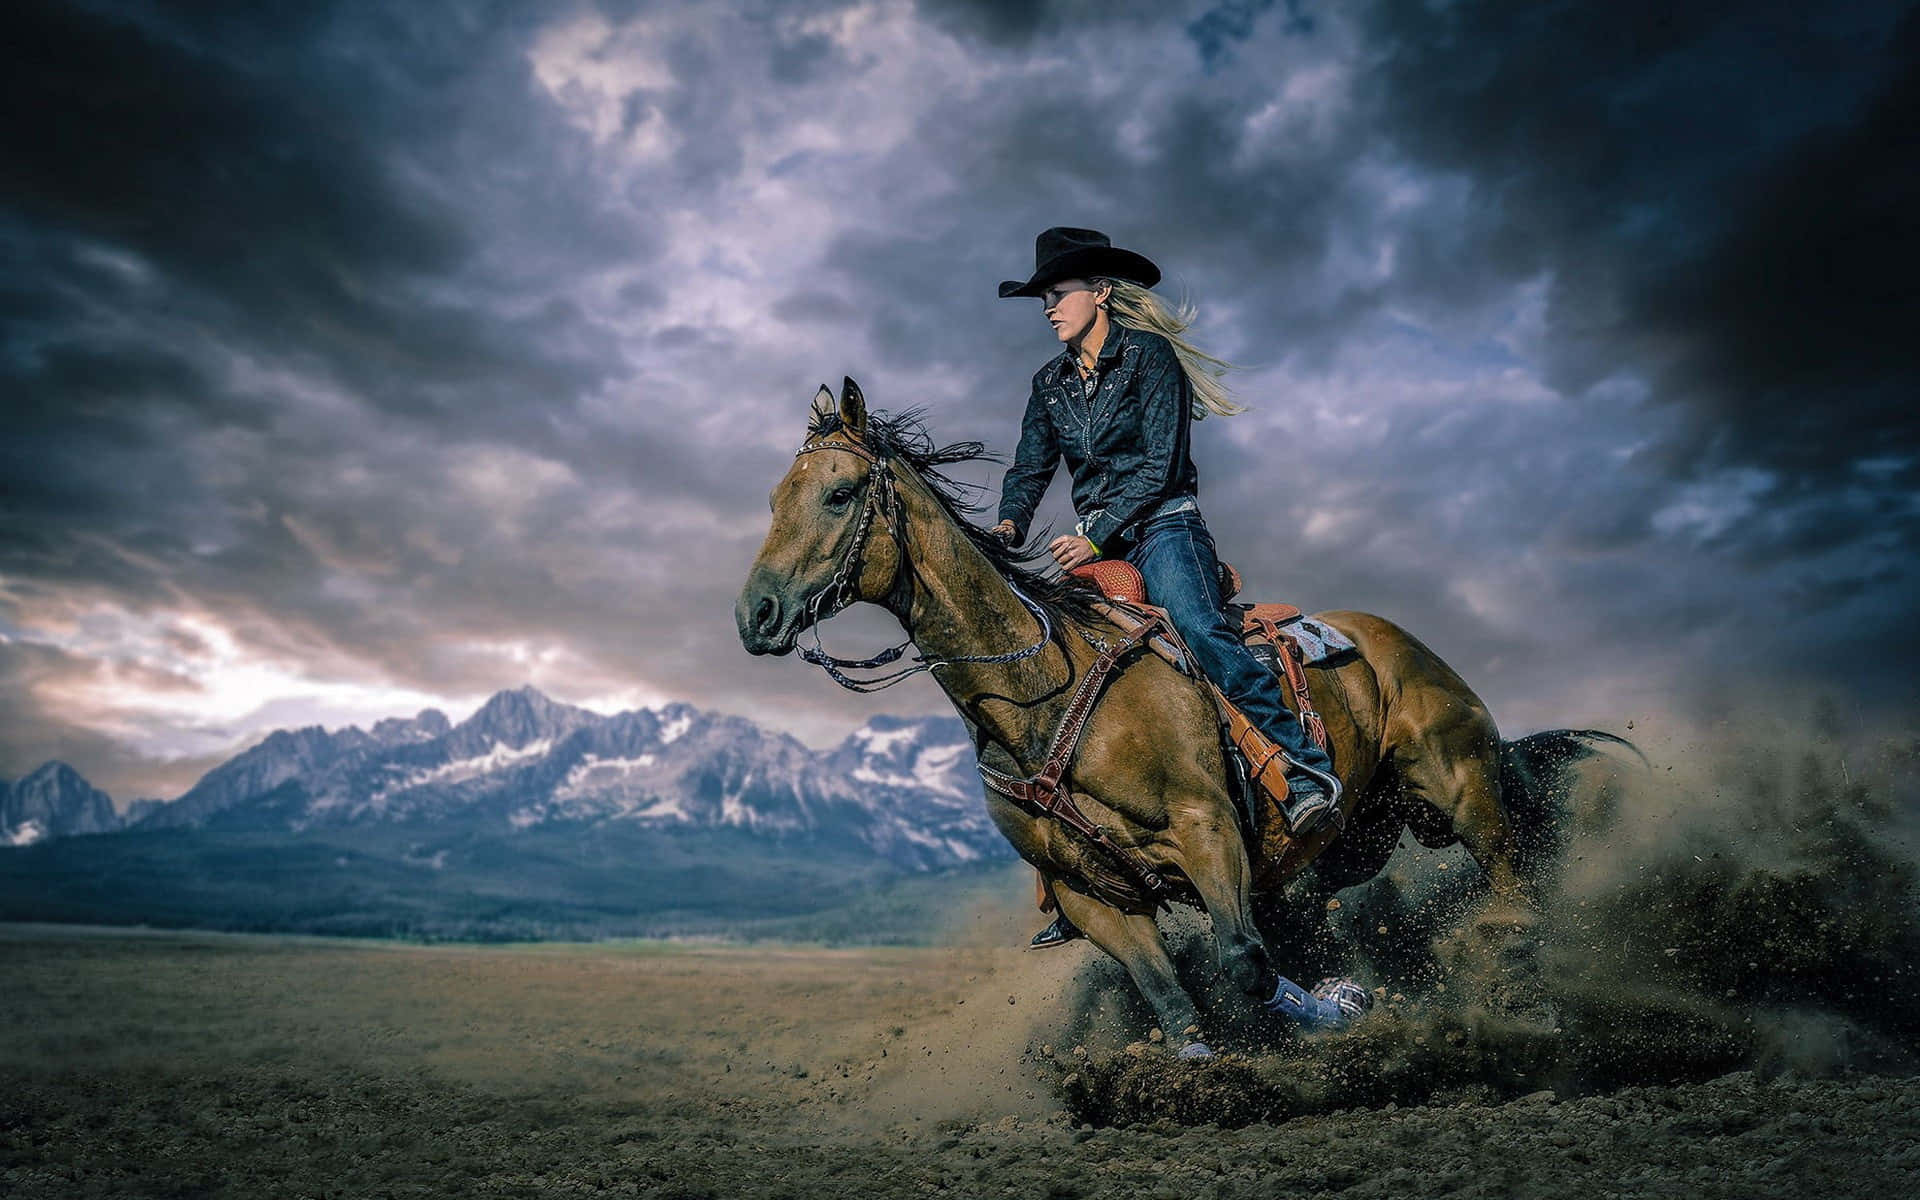 A Cowgirl Riding A Horse In The Desert